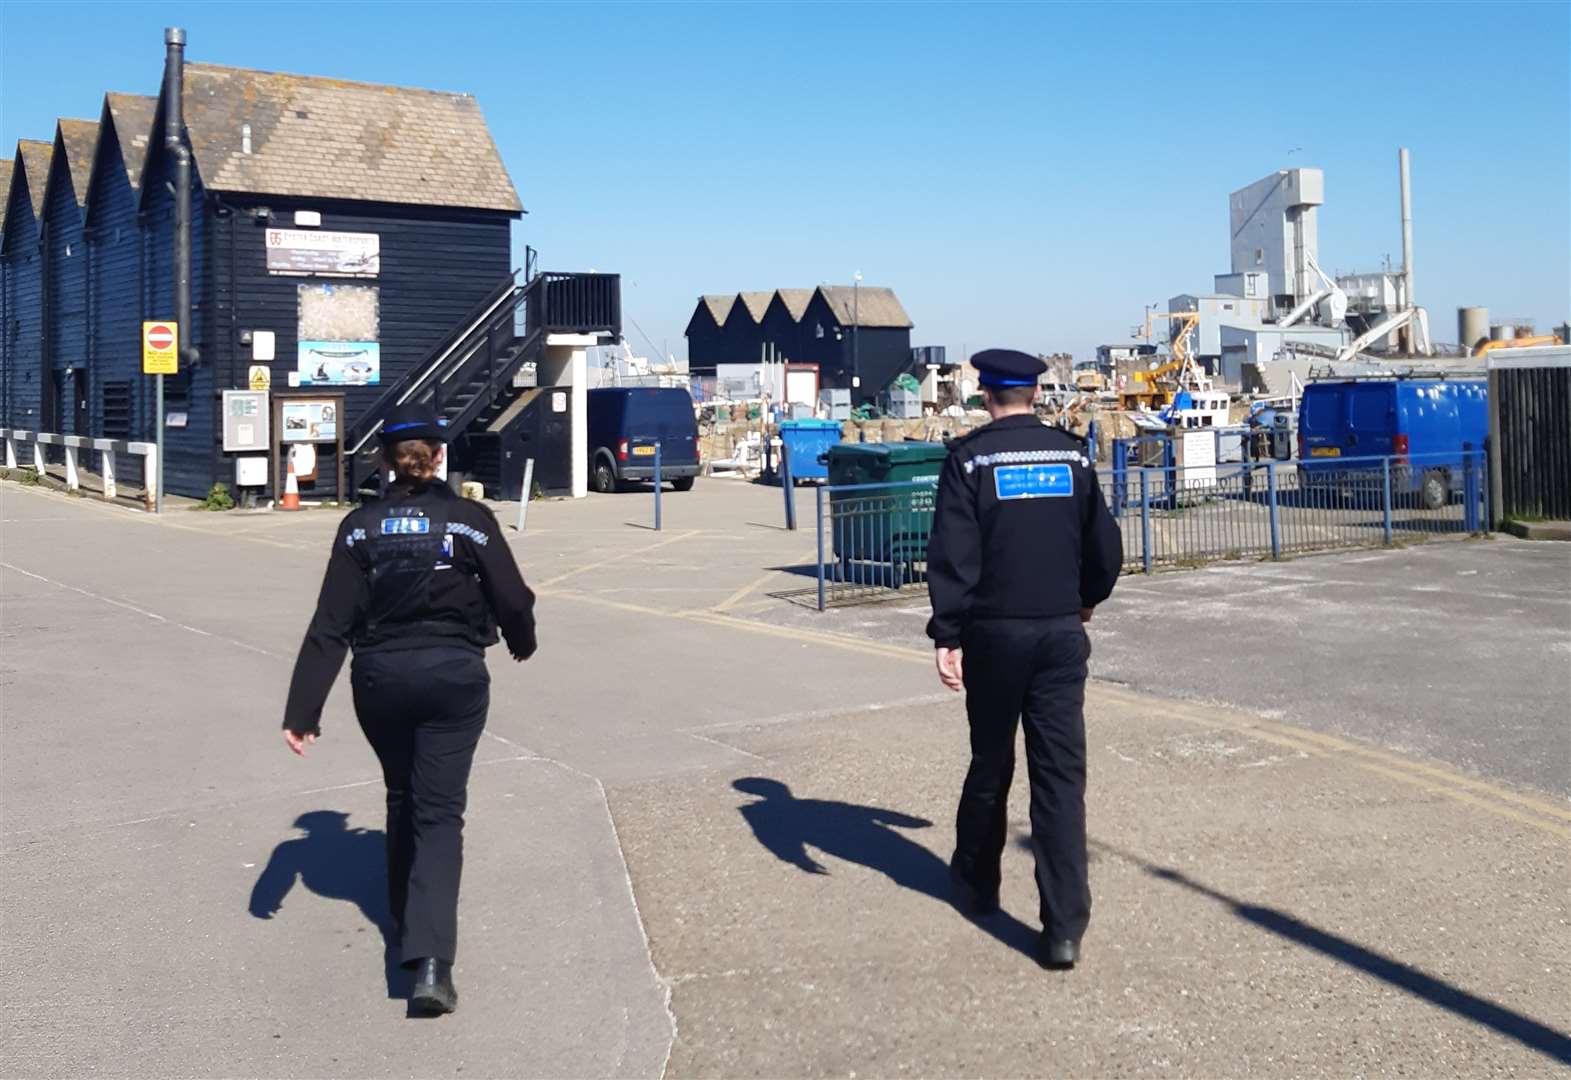 Police out on patrol in Whitstable during lockdown earlier this year